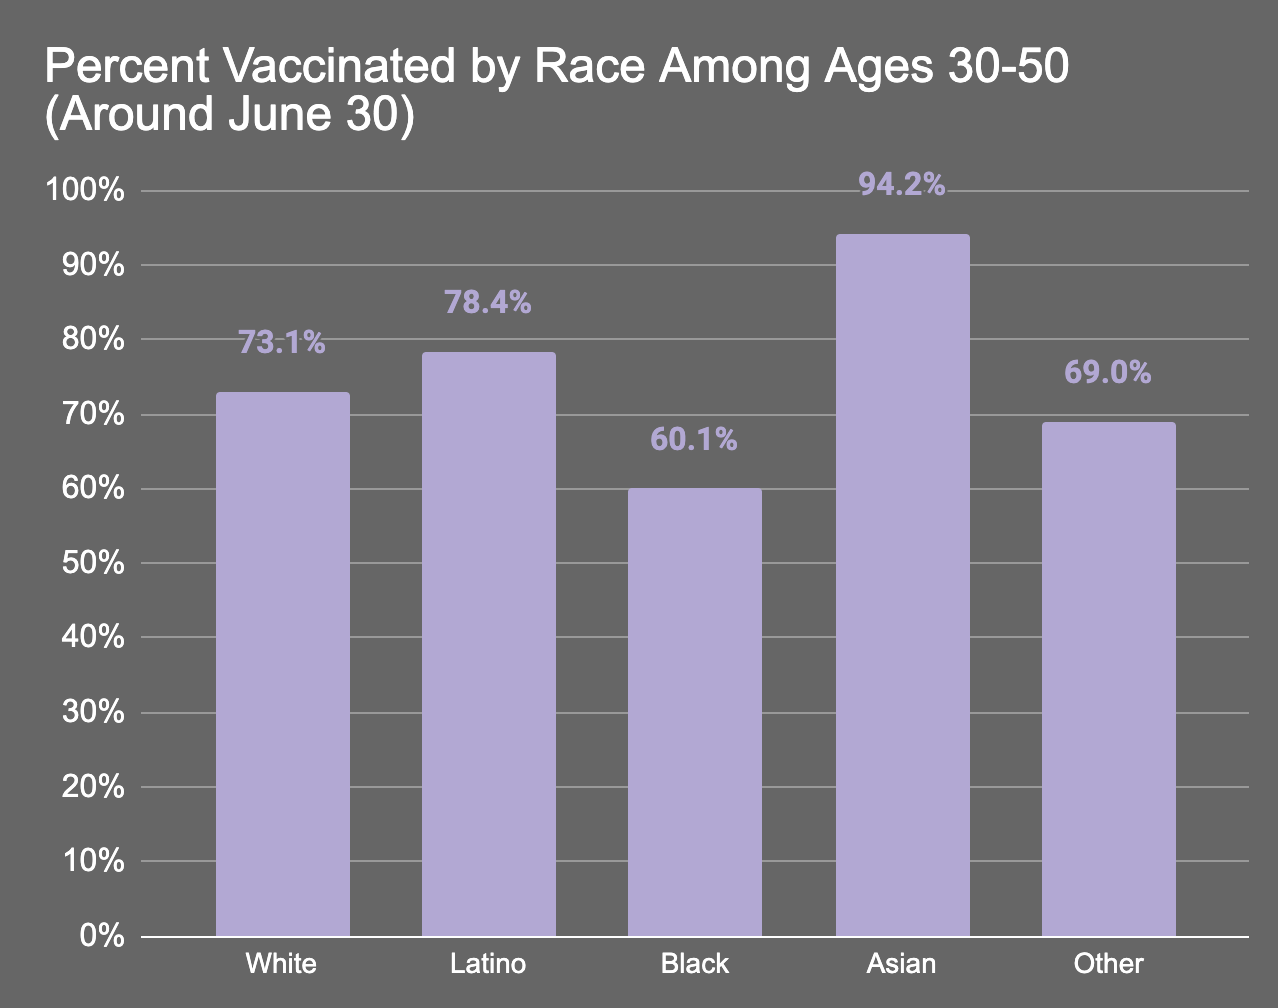 Does the Tuskegee Experiment Really Explain Black Vaccination Rates? | naked capitalism